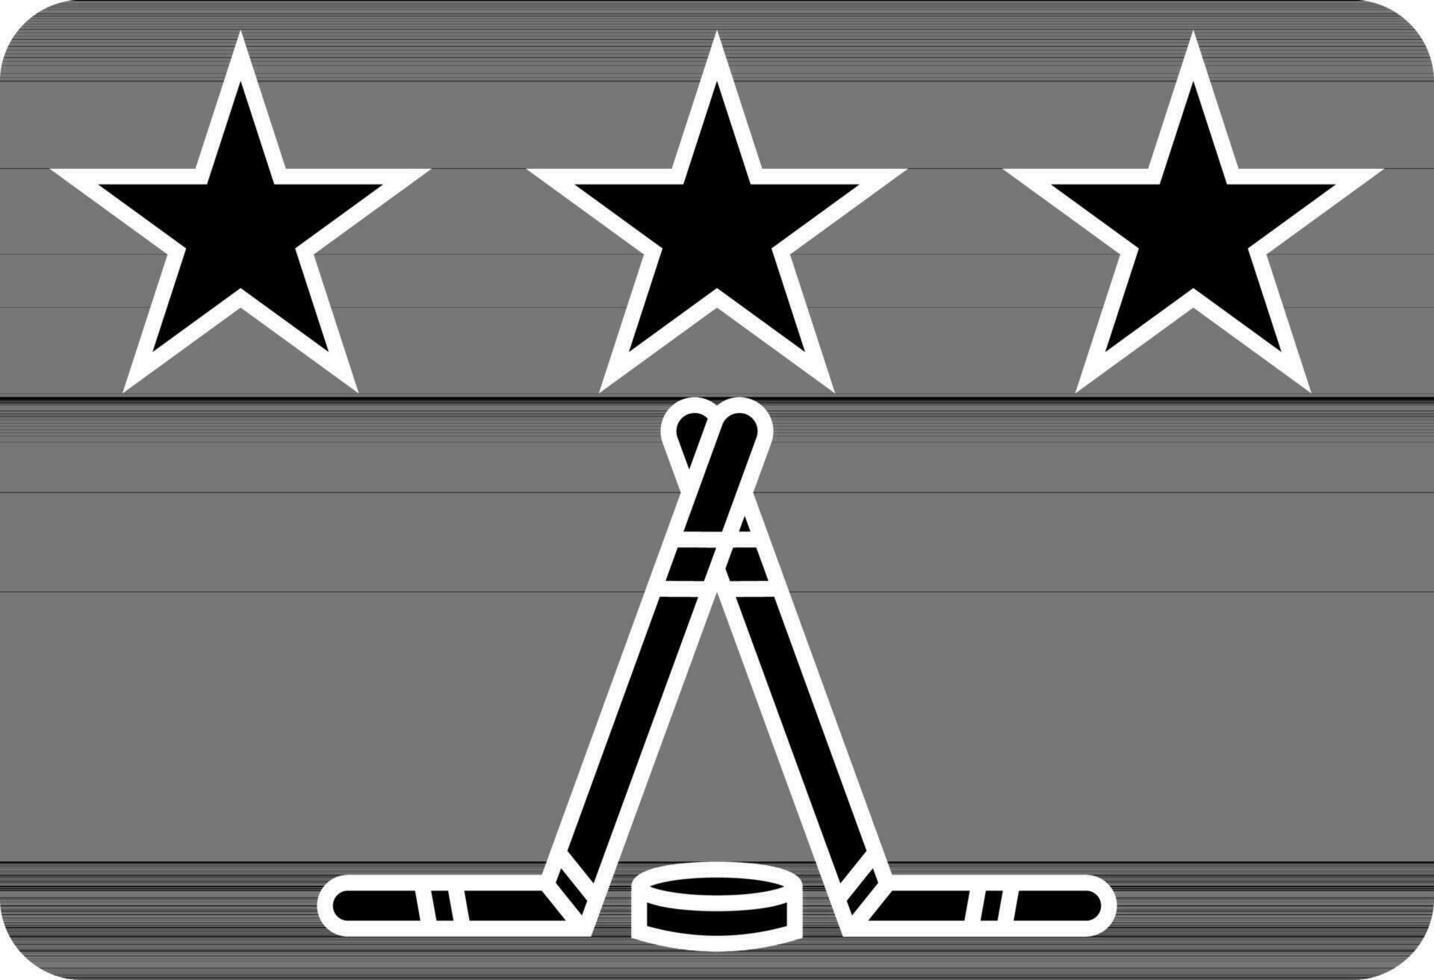 Hockey match rating icon in black and white color. vector